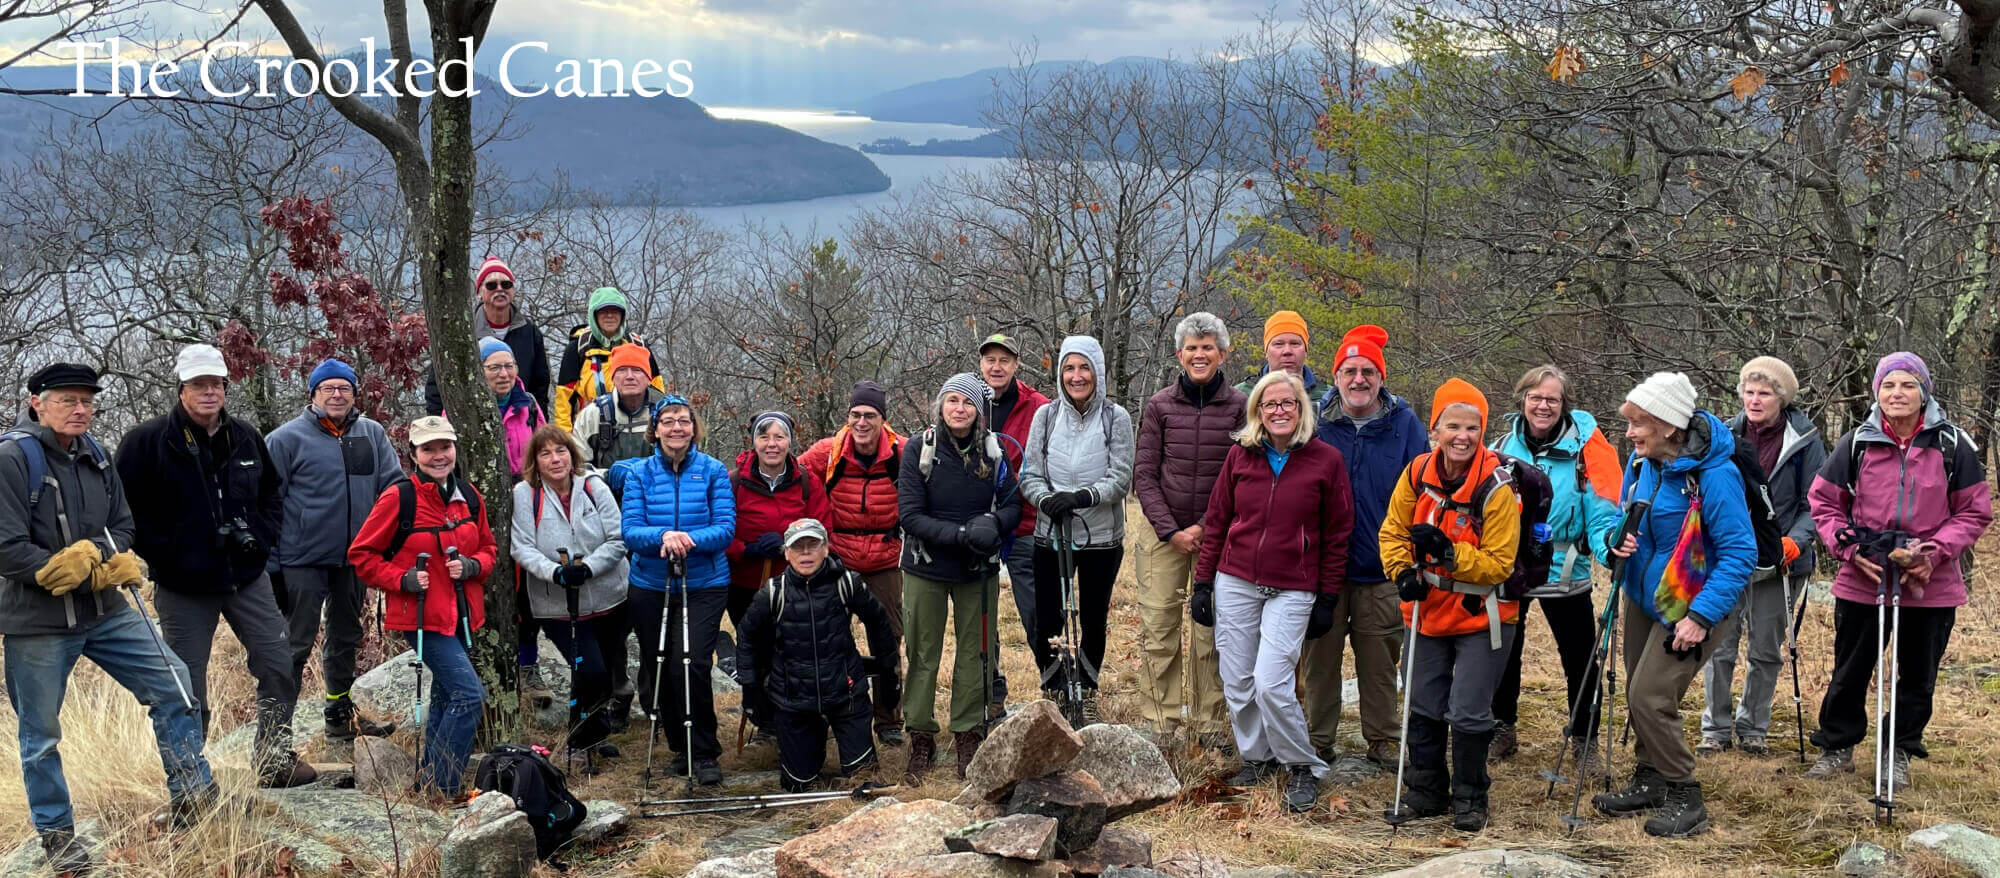 Crooked Canes hiking group, active hiking, paddling, skiing and biking enthusiasts, are shown on an Adirondacks mountain with a view of Lake George.